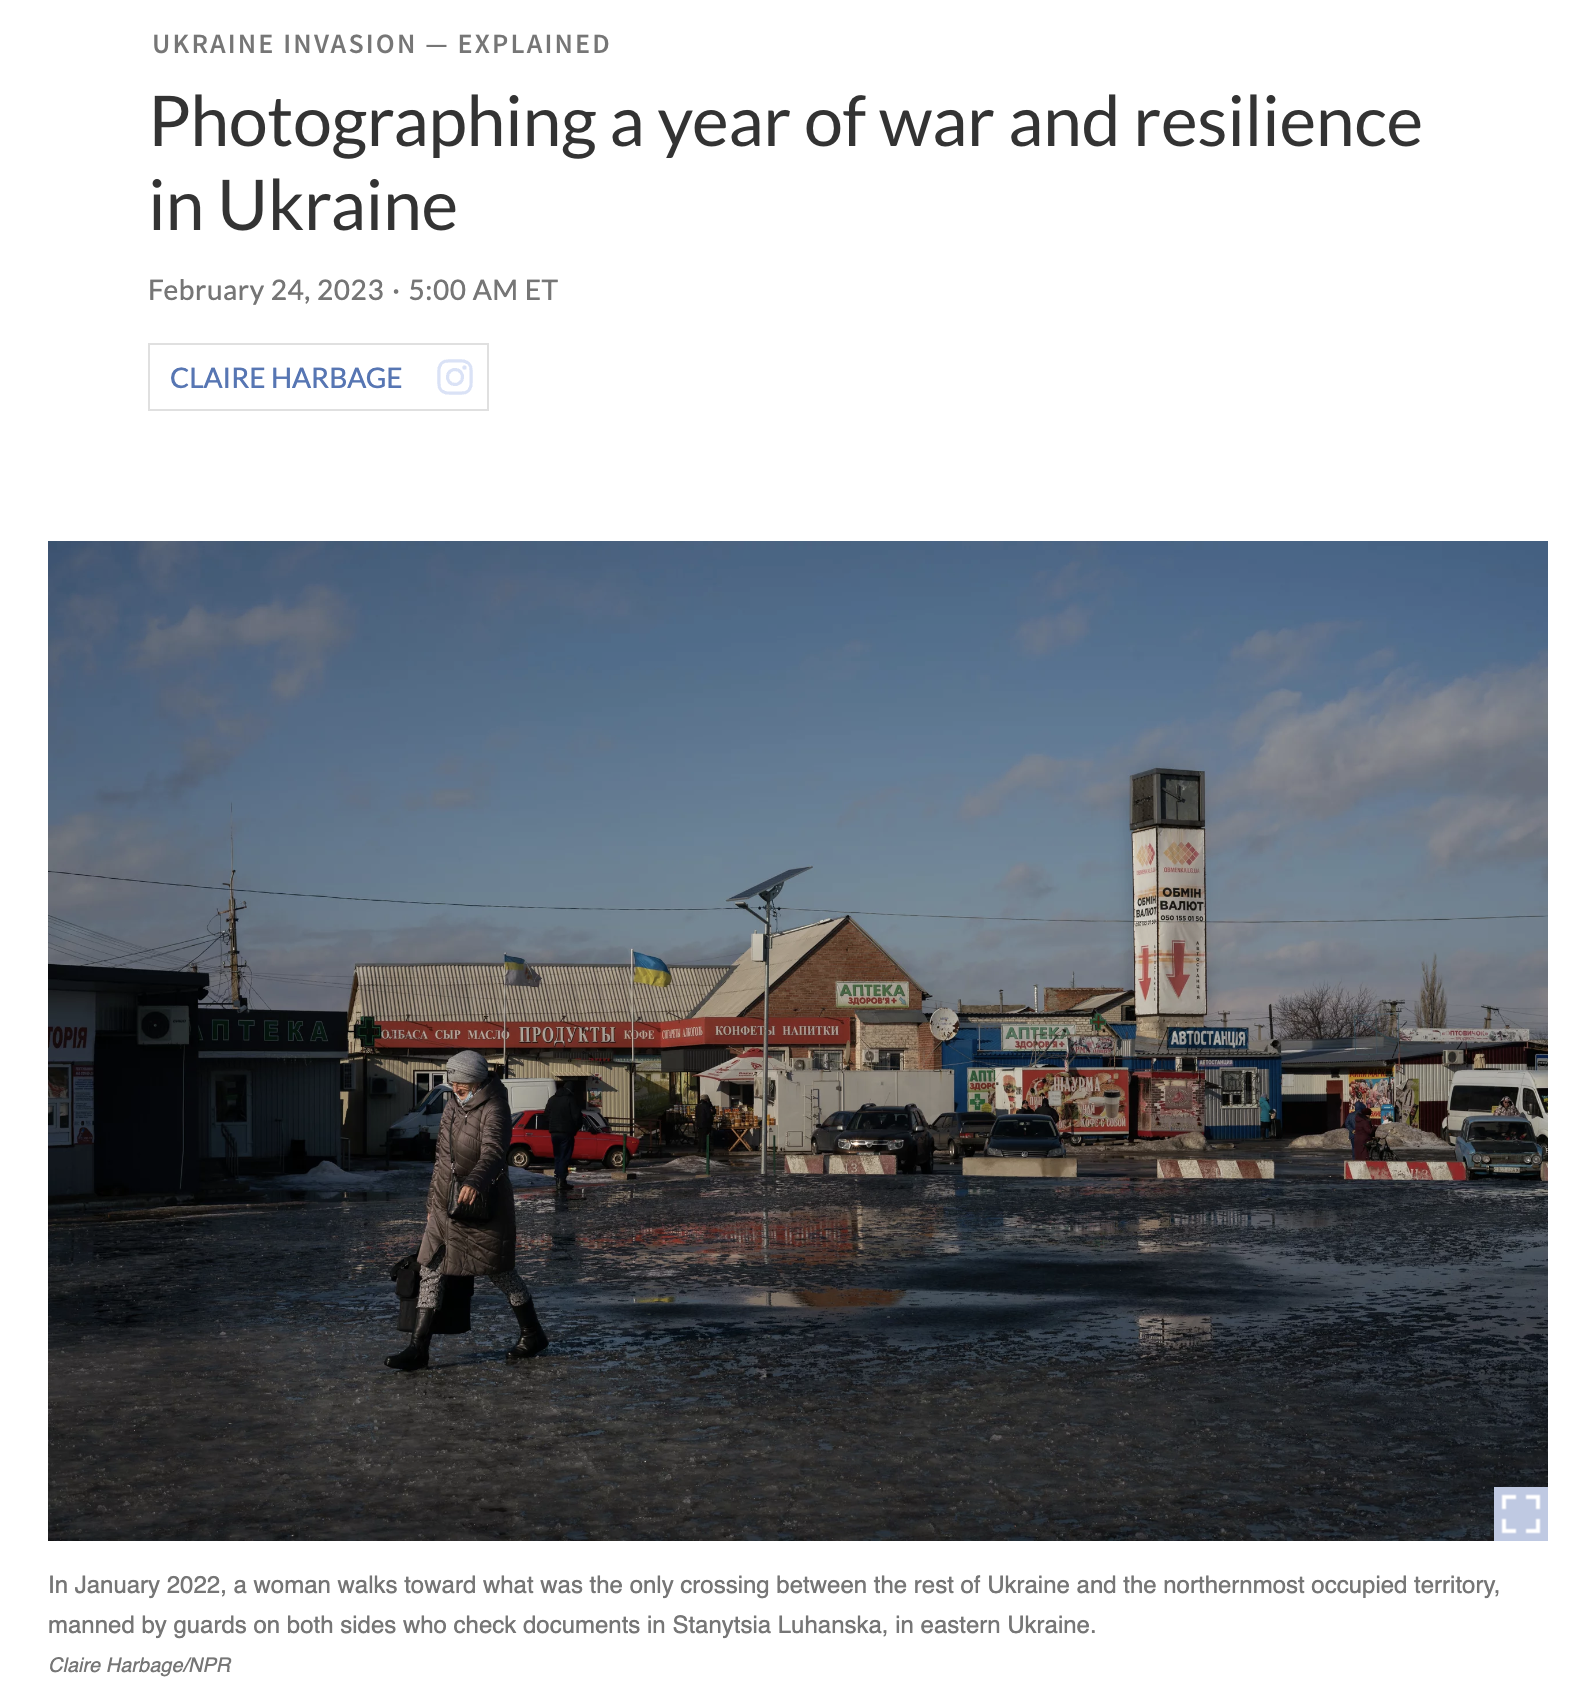   Full story    Photography: Claire Harbage/NPR  